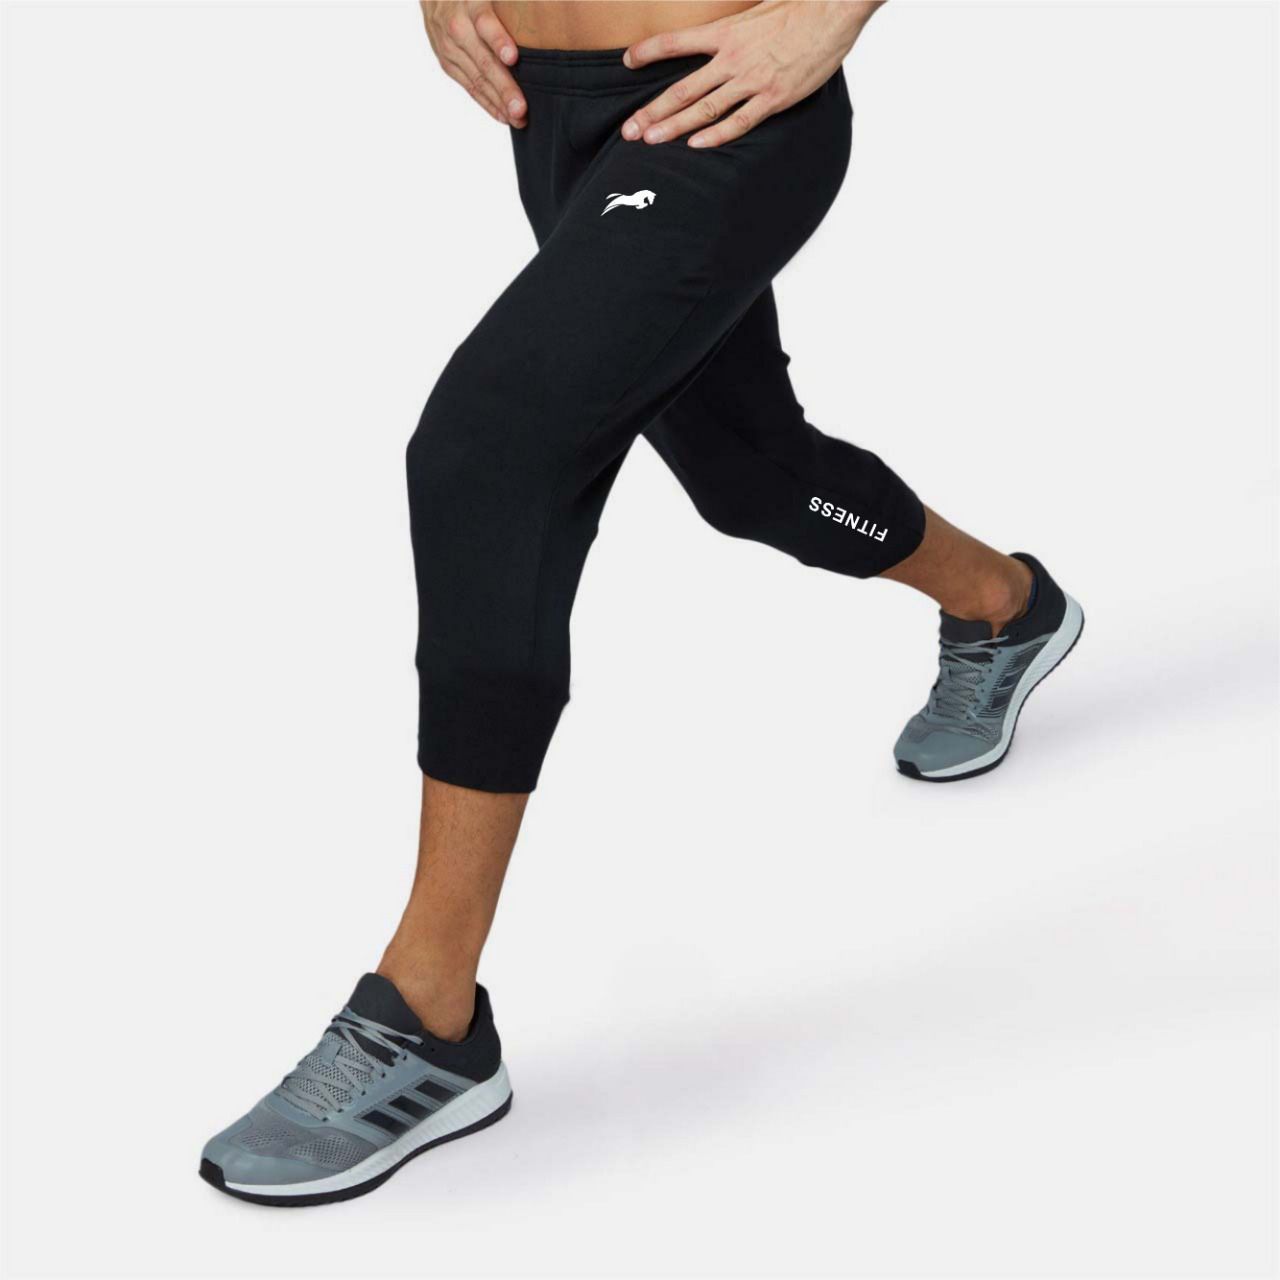 Best Polyester workout clothes 